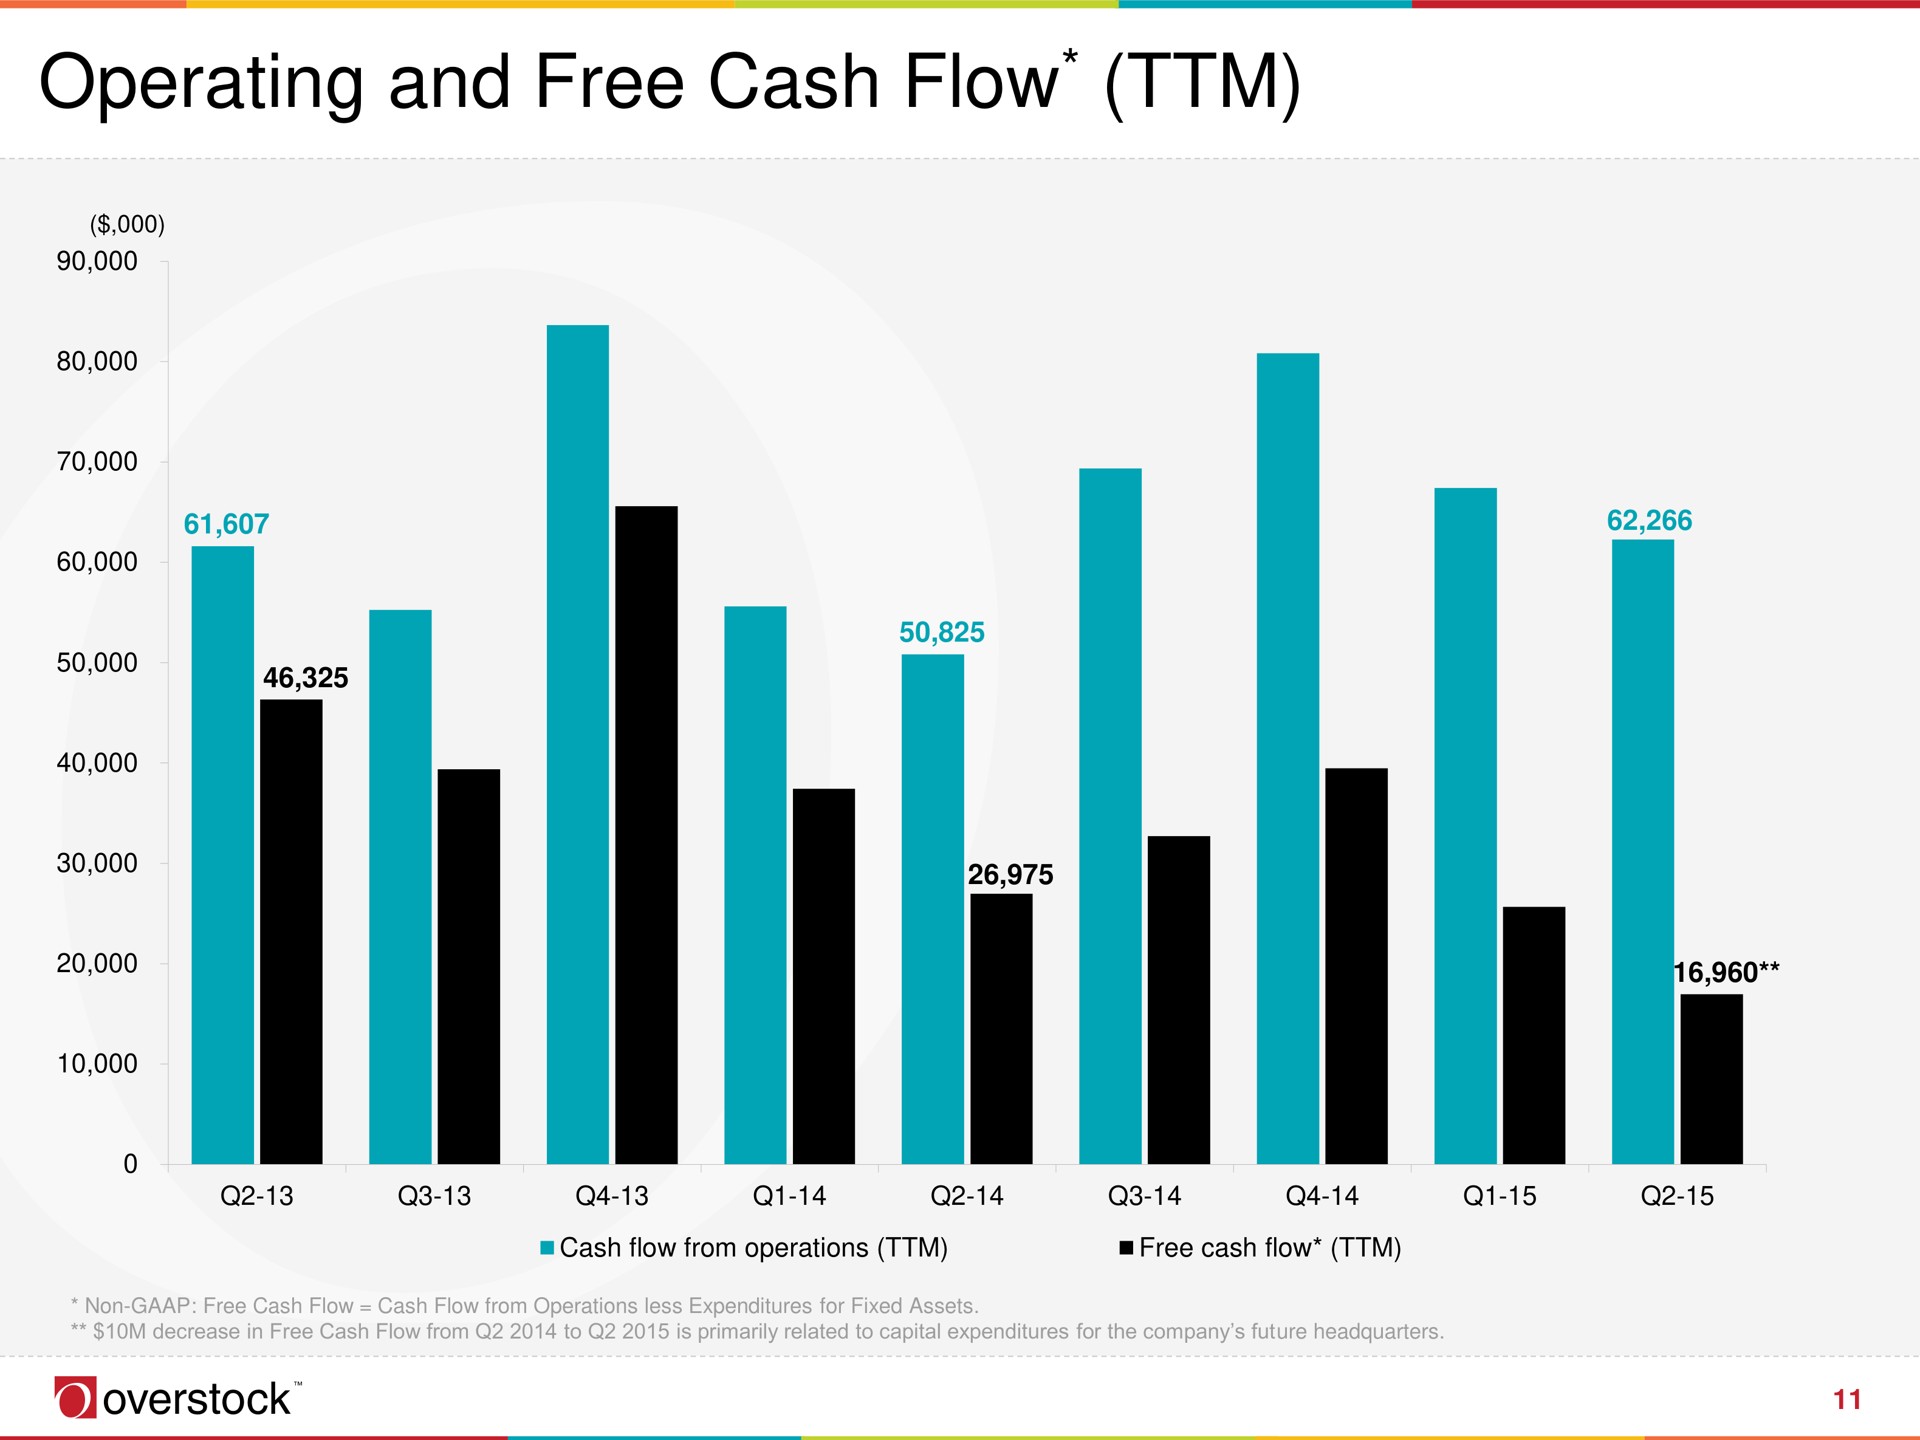 operating and free cash flow | Overstock